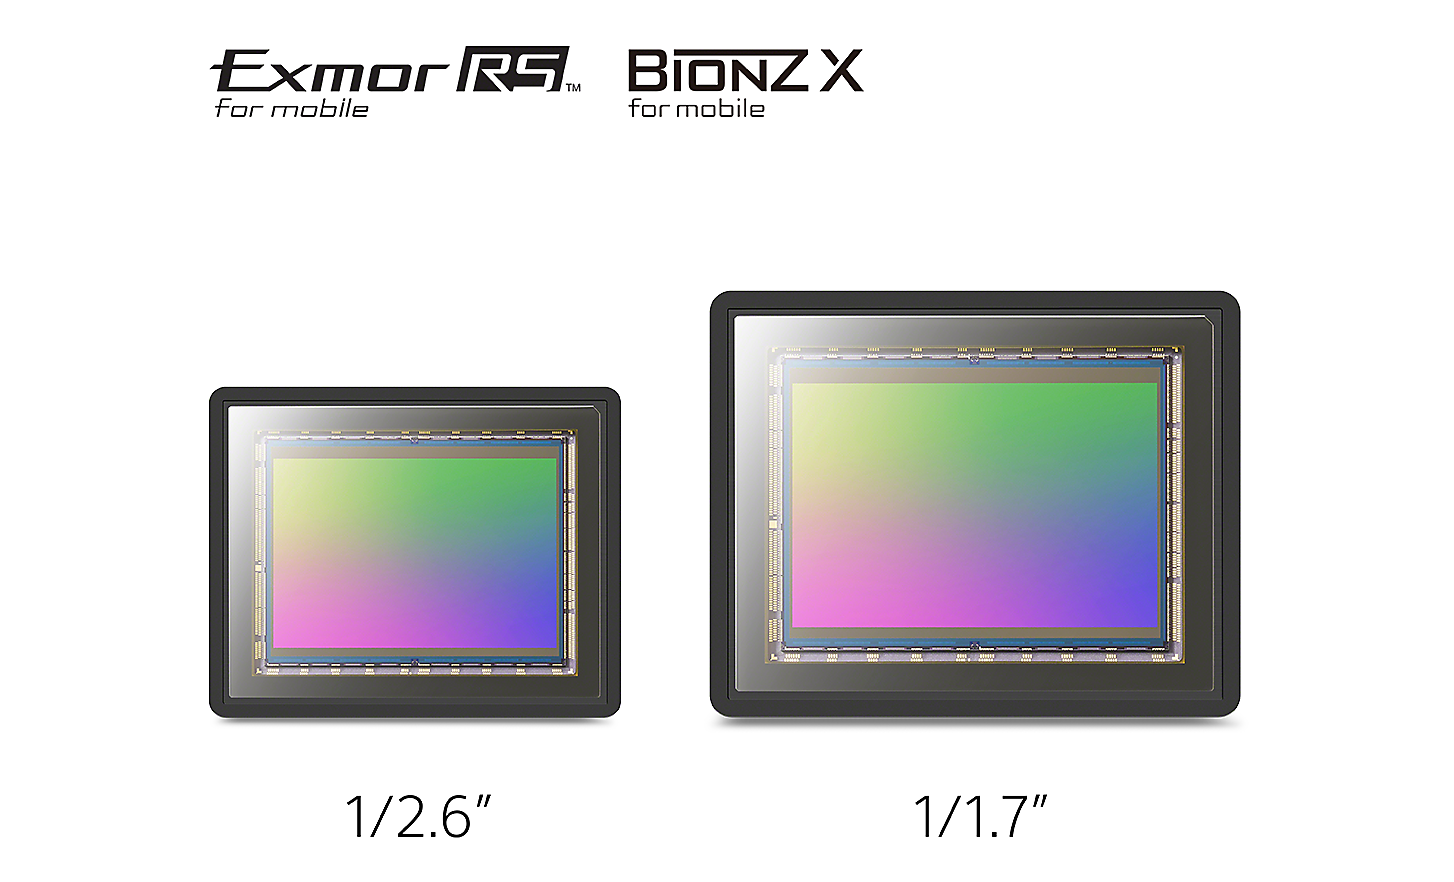 Image comparing a 1/2.6" image sensor with a larger 1/1.7" image sensor, plus logos for Exmor RS™ for mobile and Bionz X™ for mobile